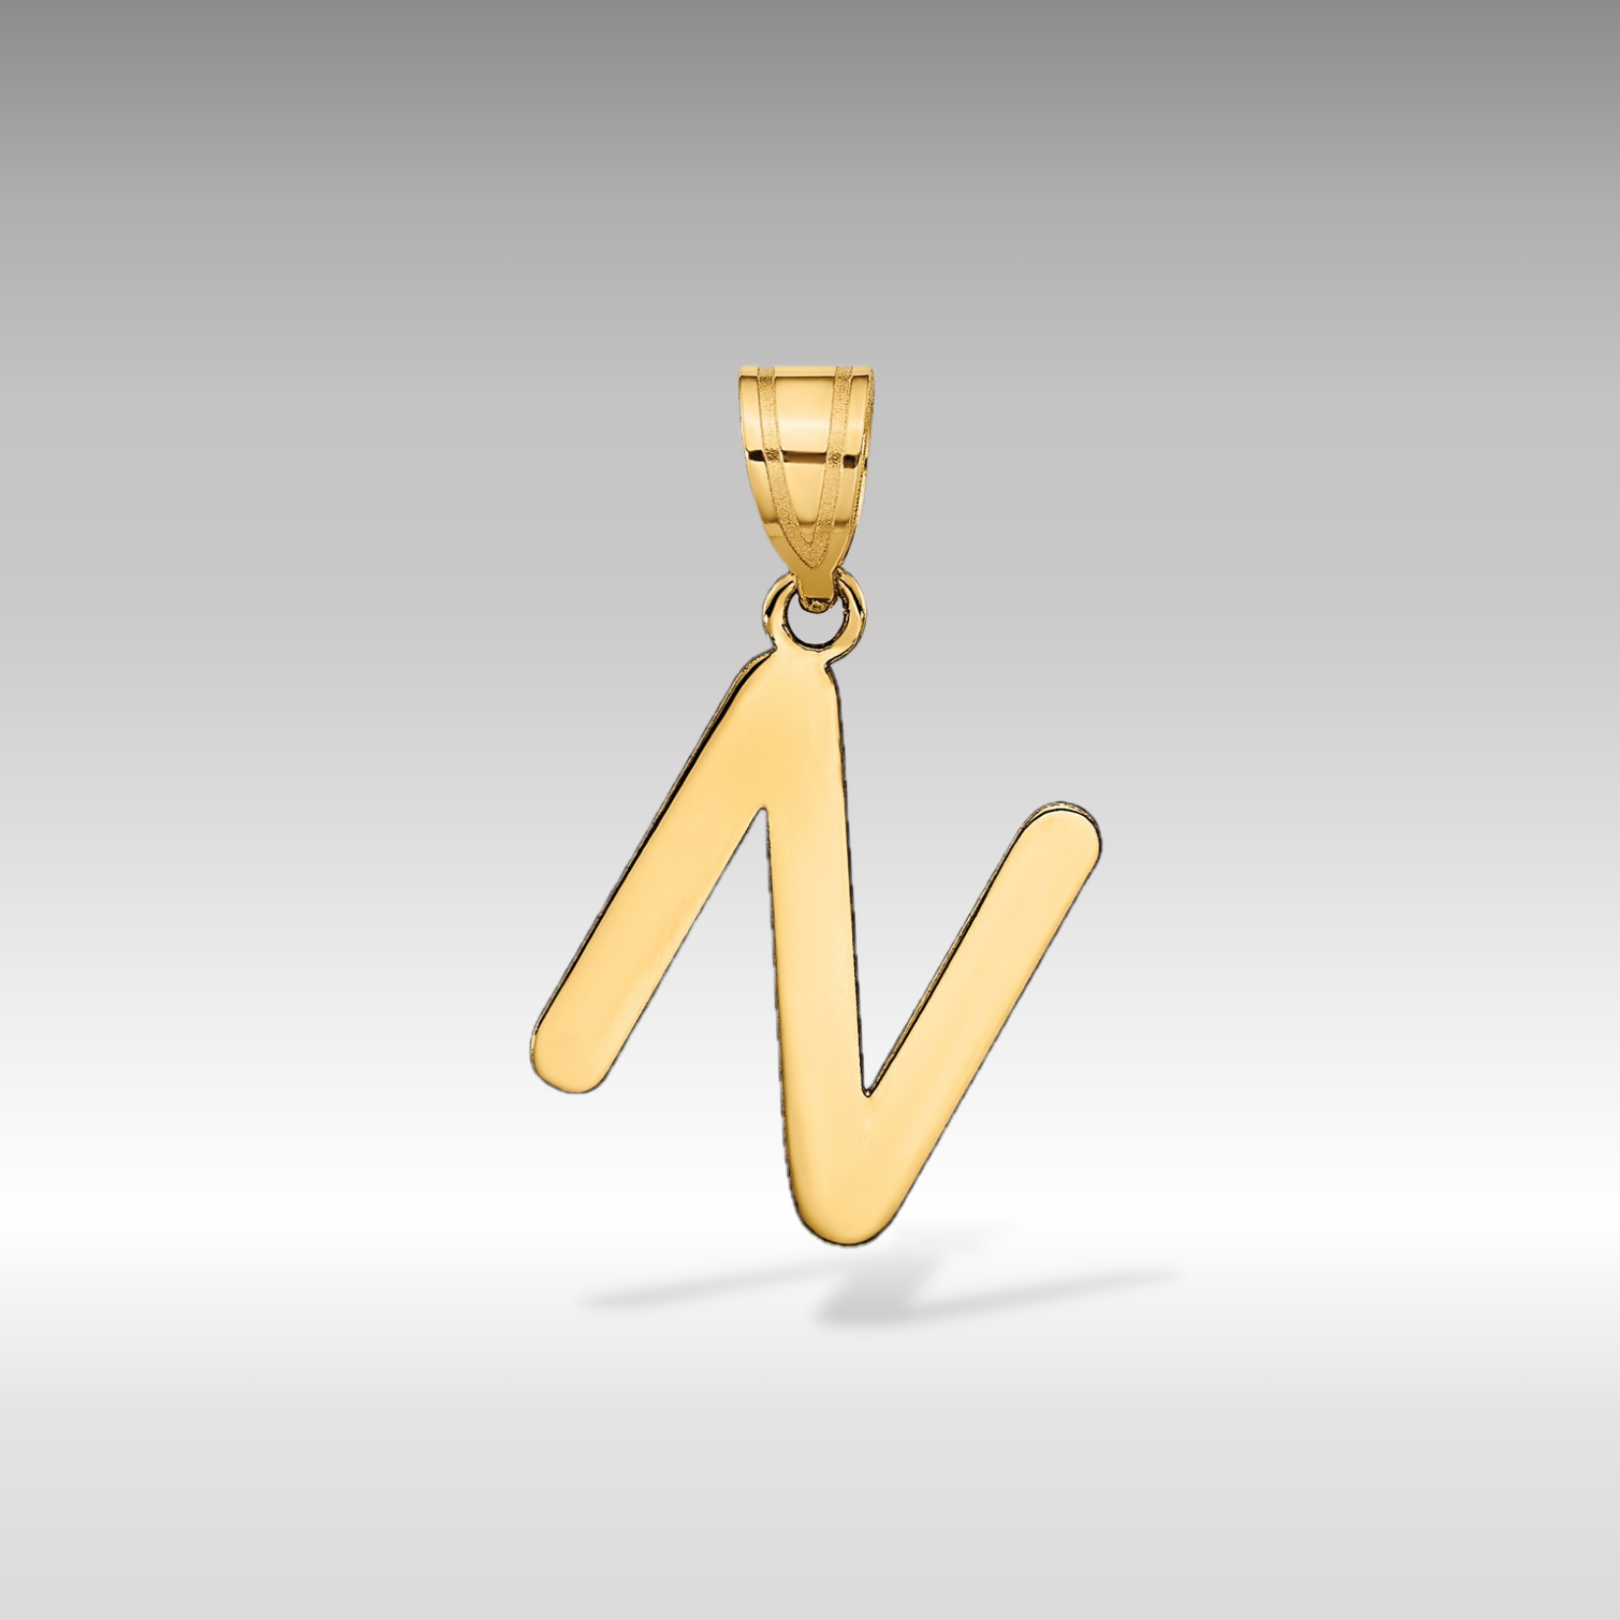 14k Gold Polished Letter 'N' Initial Charm - Charlie & Co. Jewelry